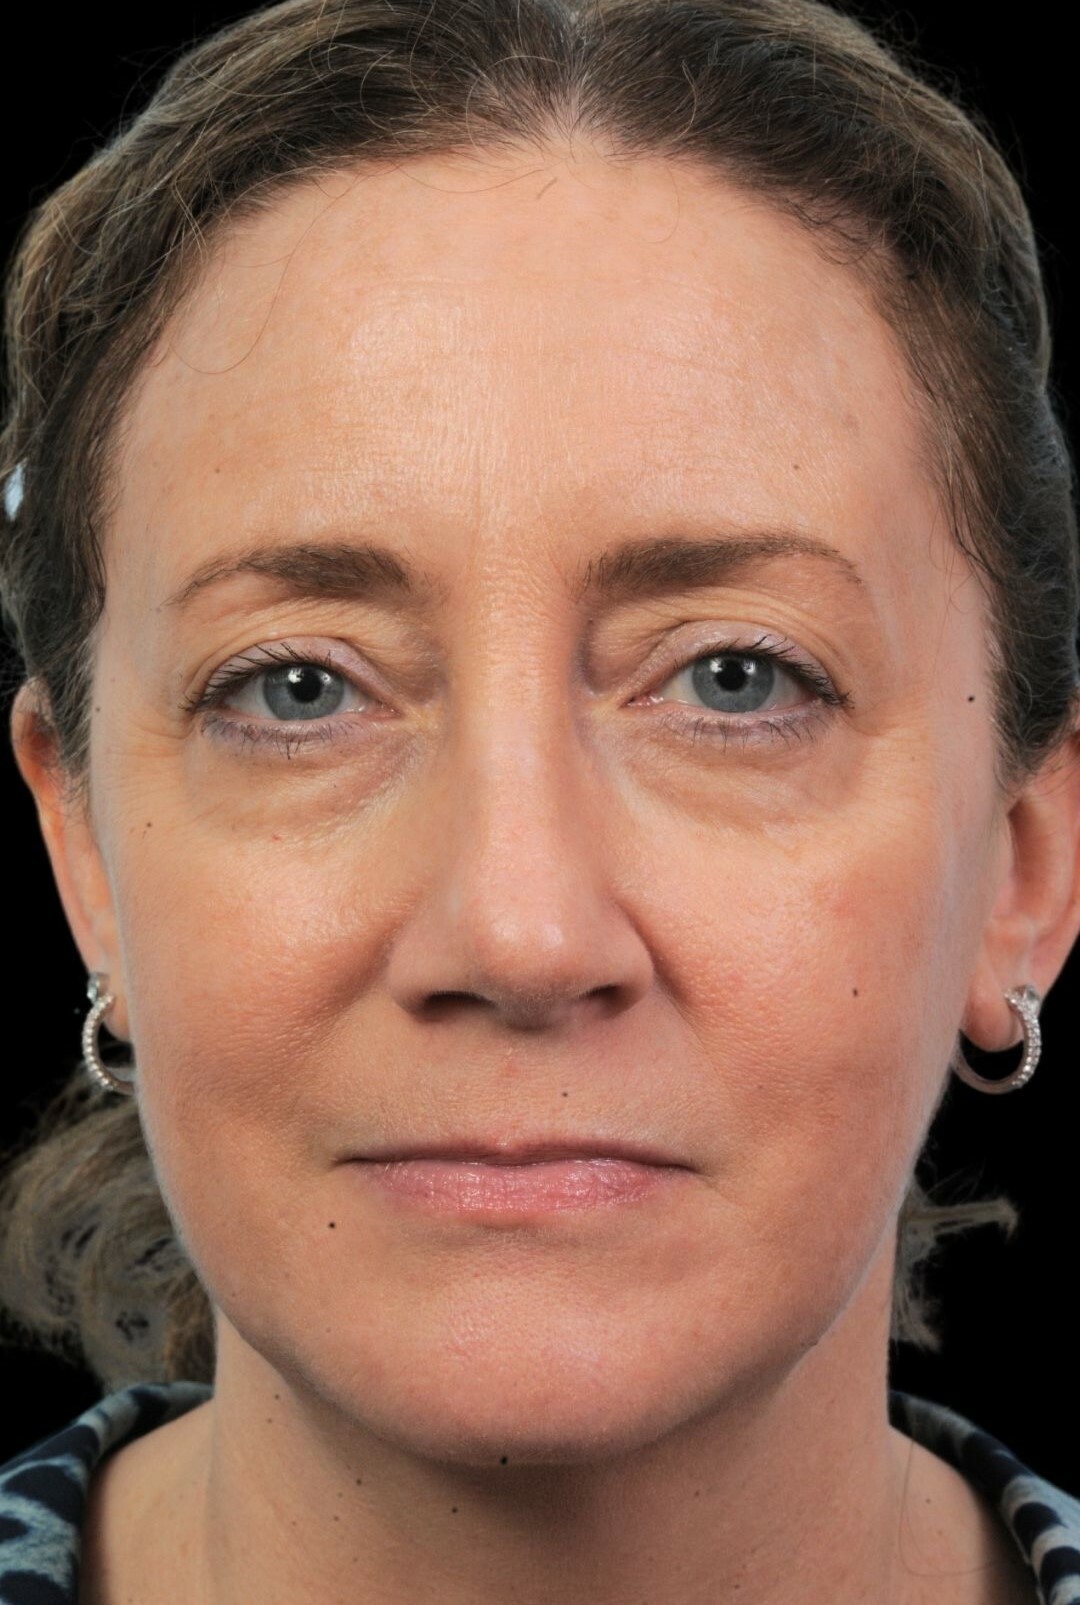 Photo of the patient’s face after the Rhinoplasty surgery. Patient 2 - Set 3